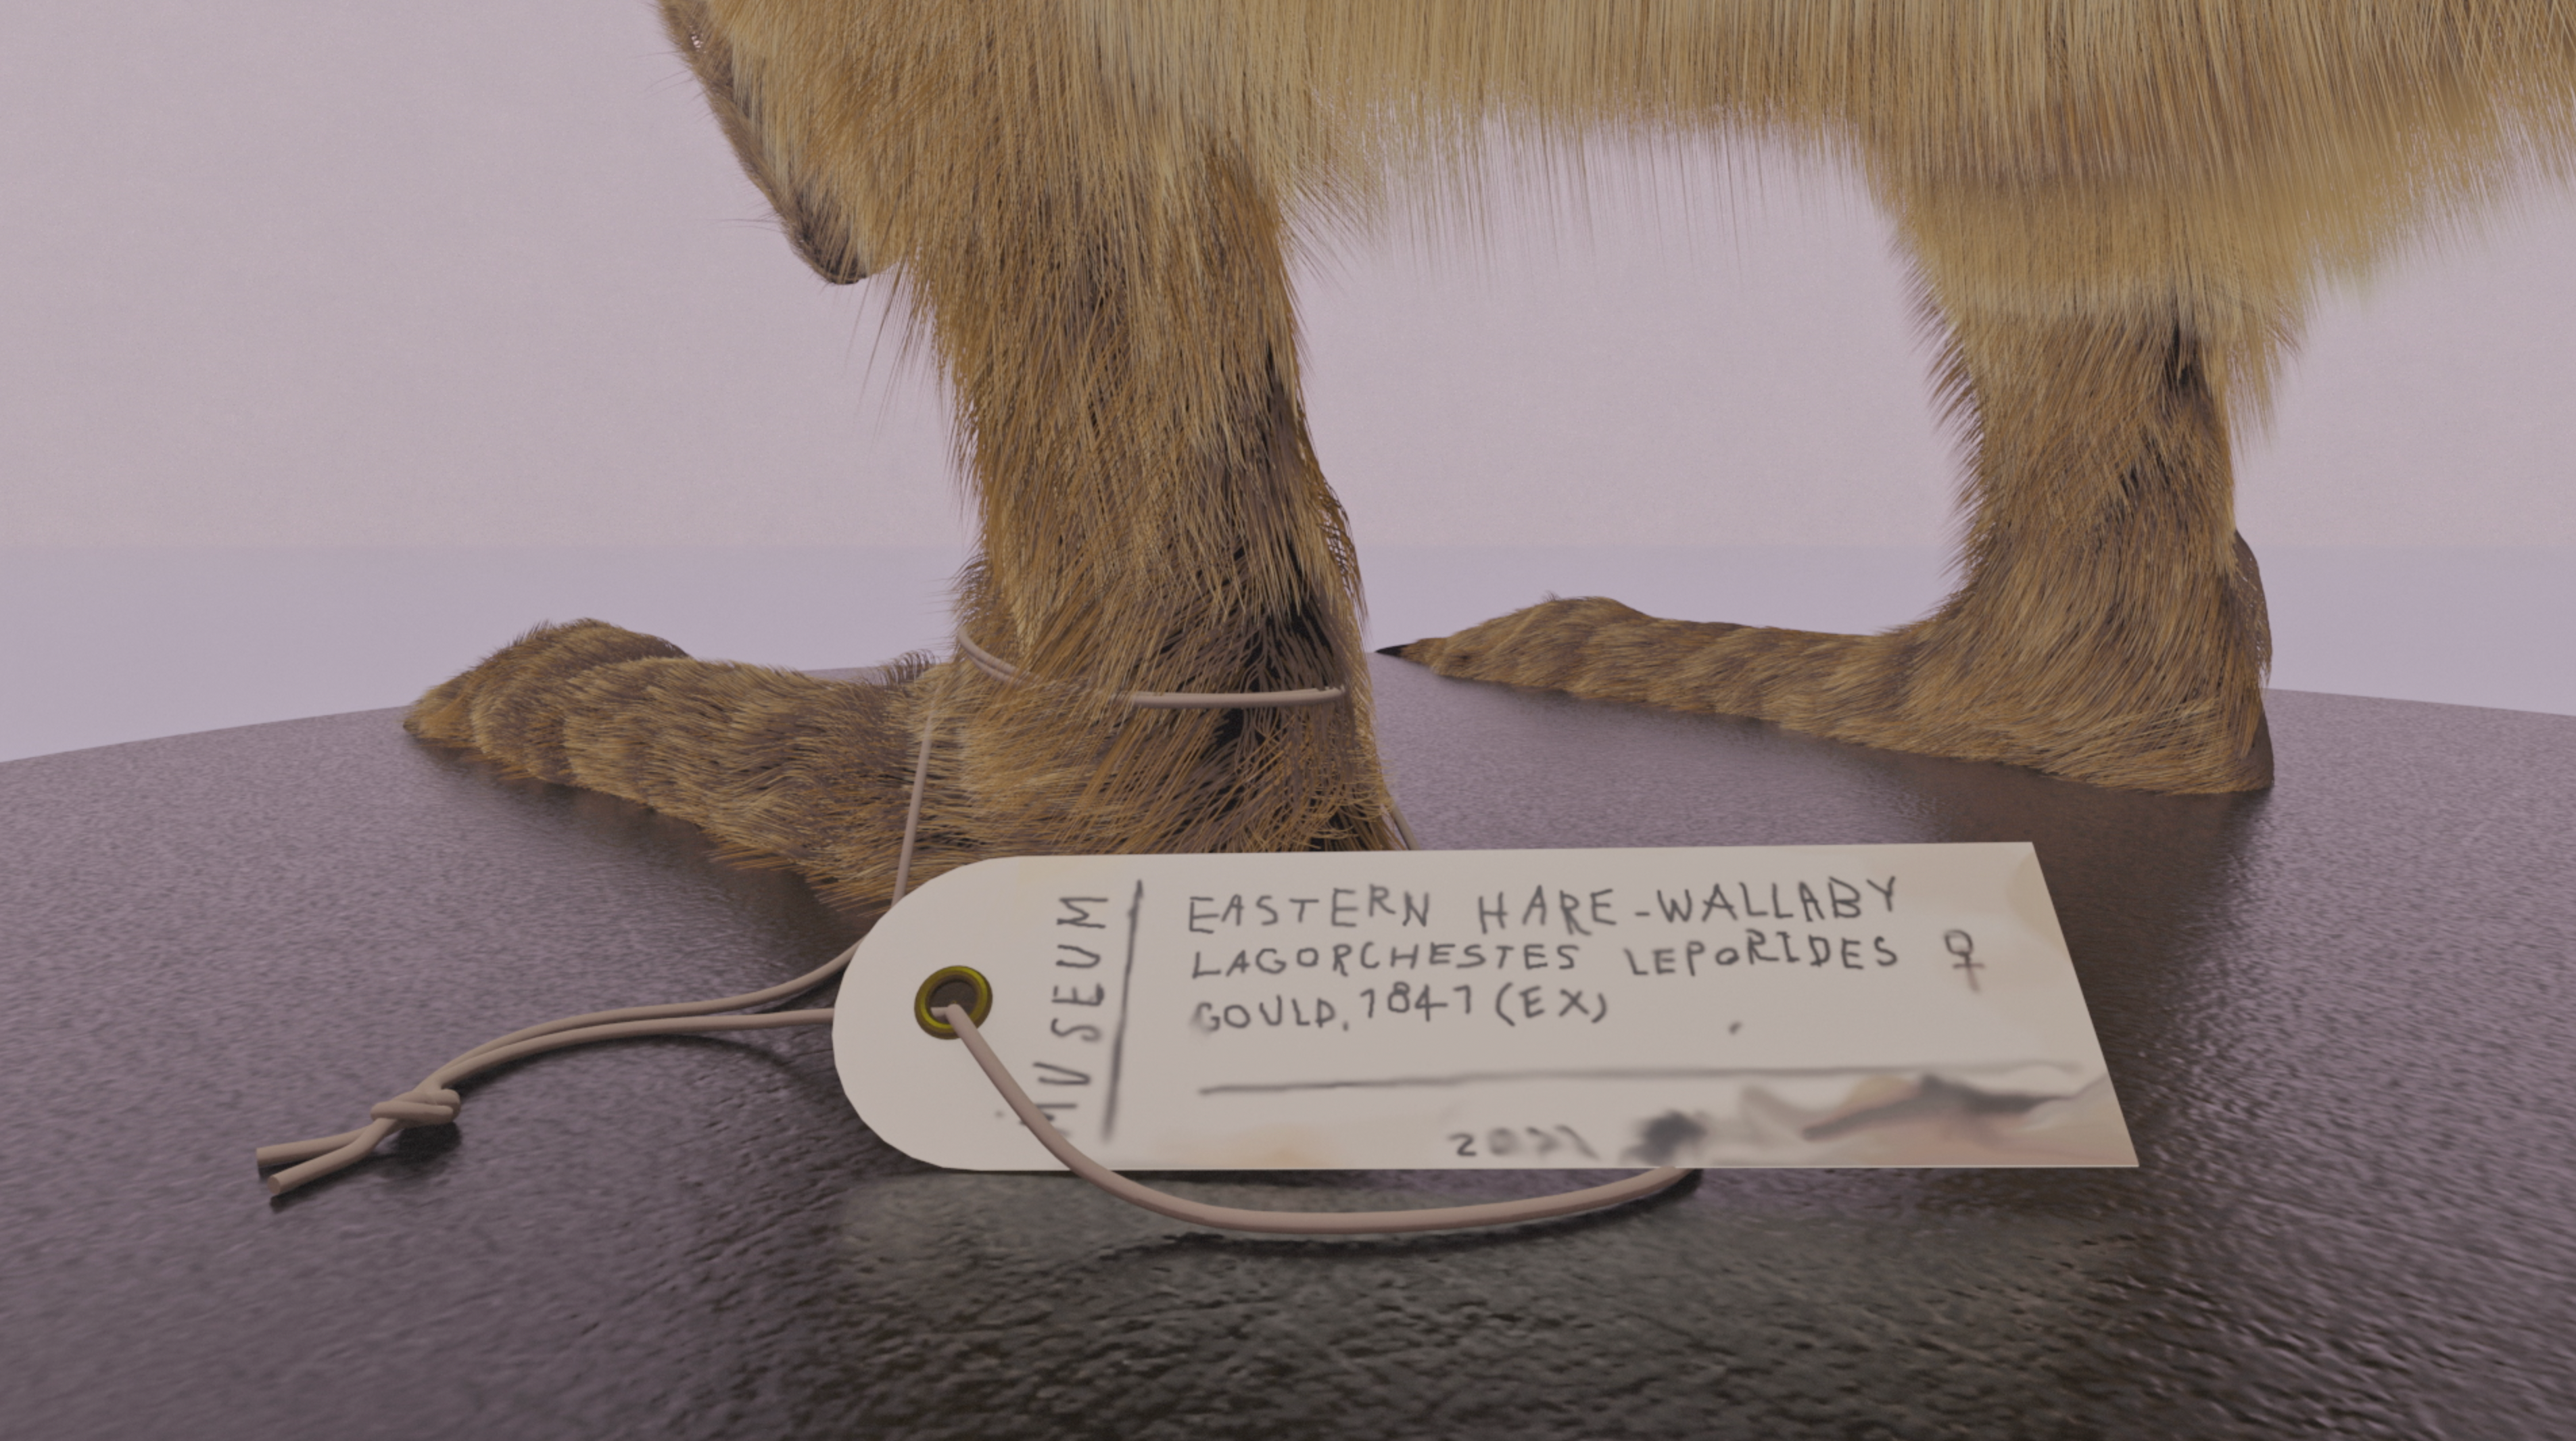 2 legs of a mouse will the frame. One leg has a paper tag attached to it that is a museum label 